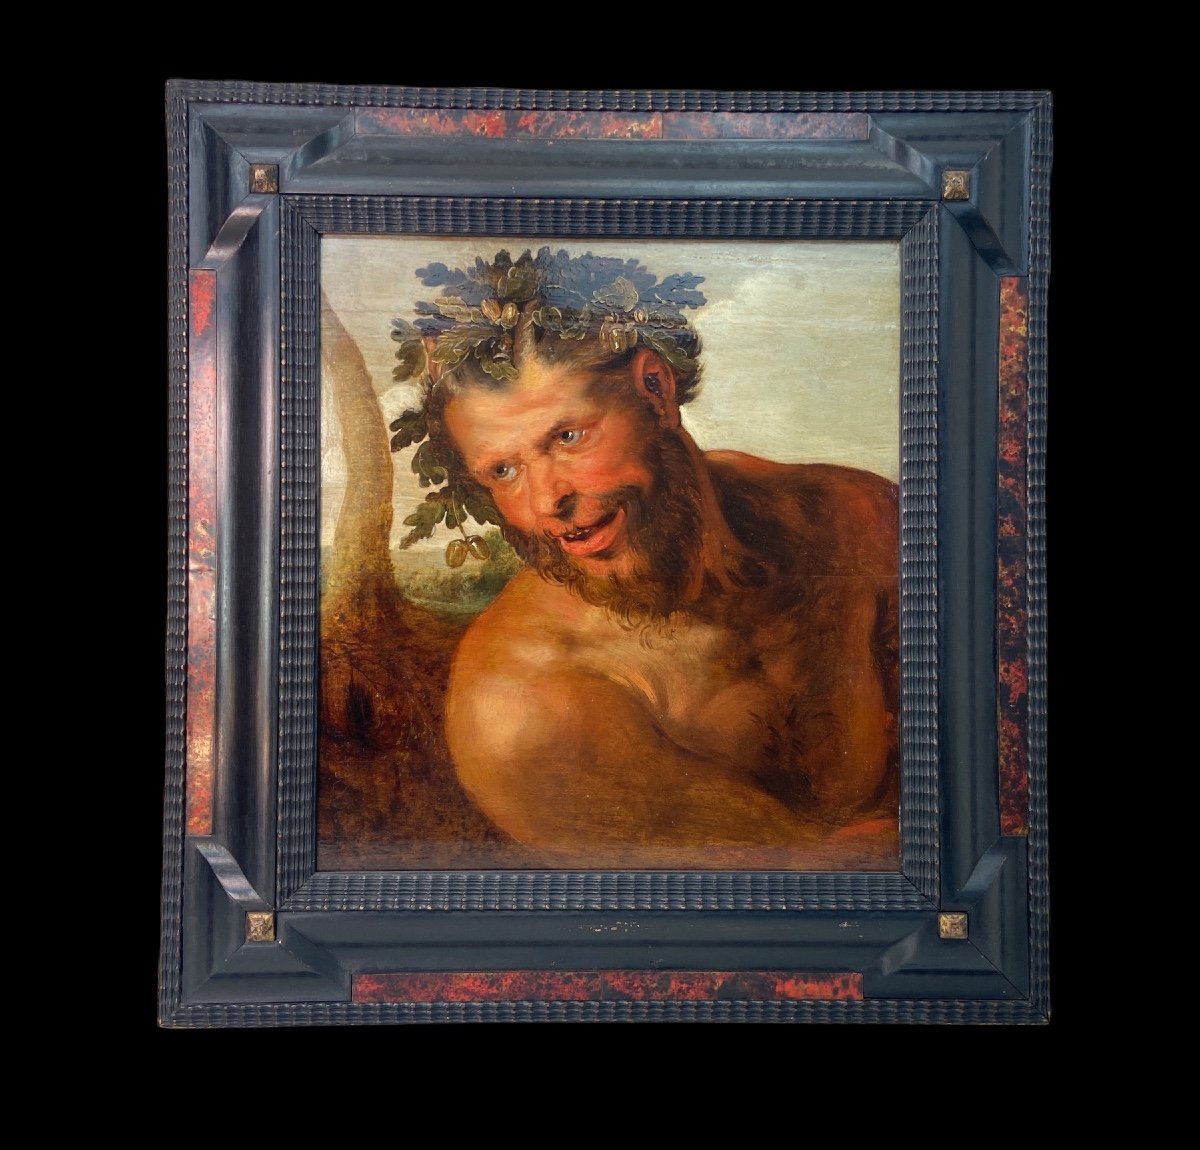 Panel With An Image Of Tmolus - Painted By A Follower Of Jacob Jordaens - 18th Century